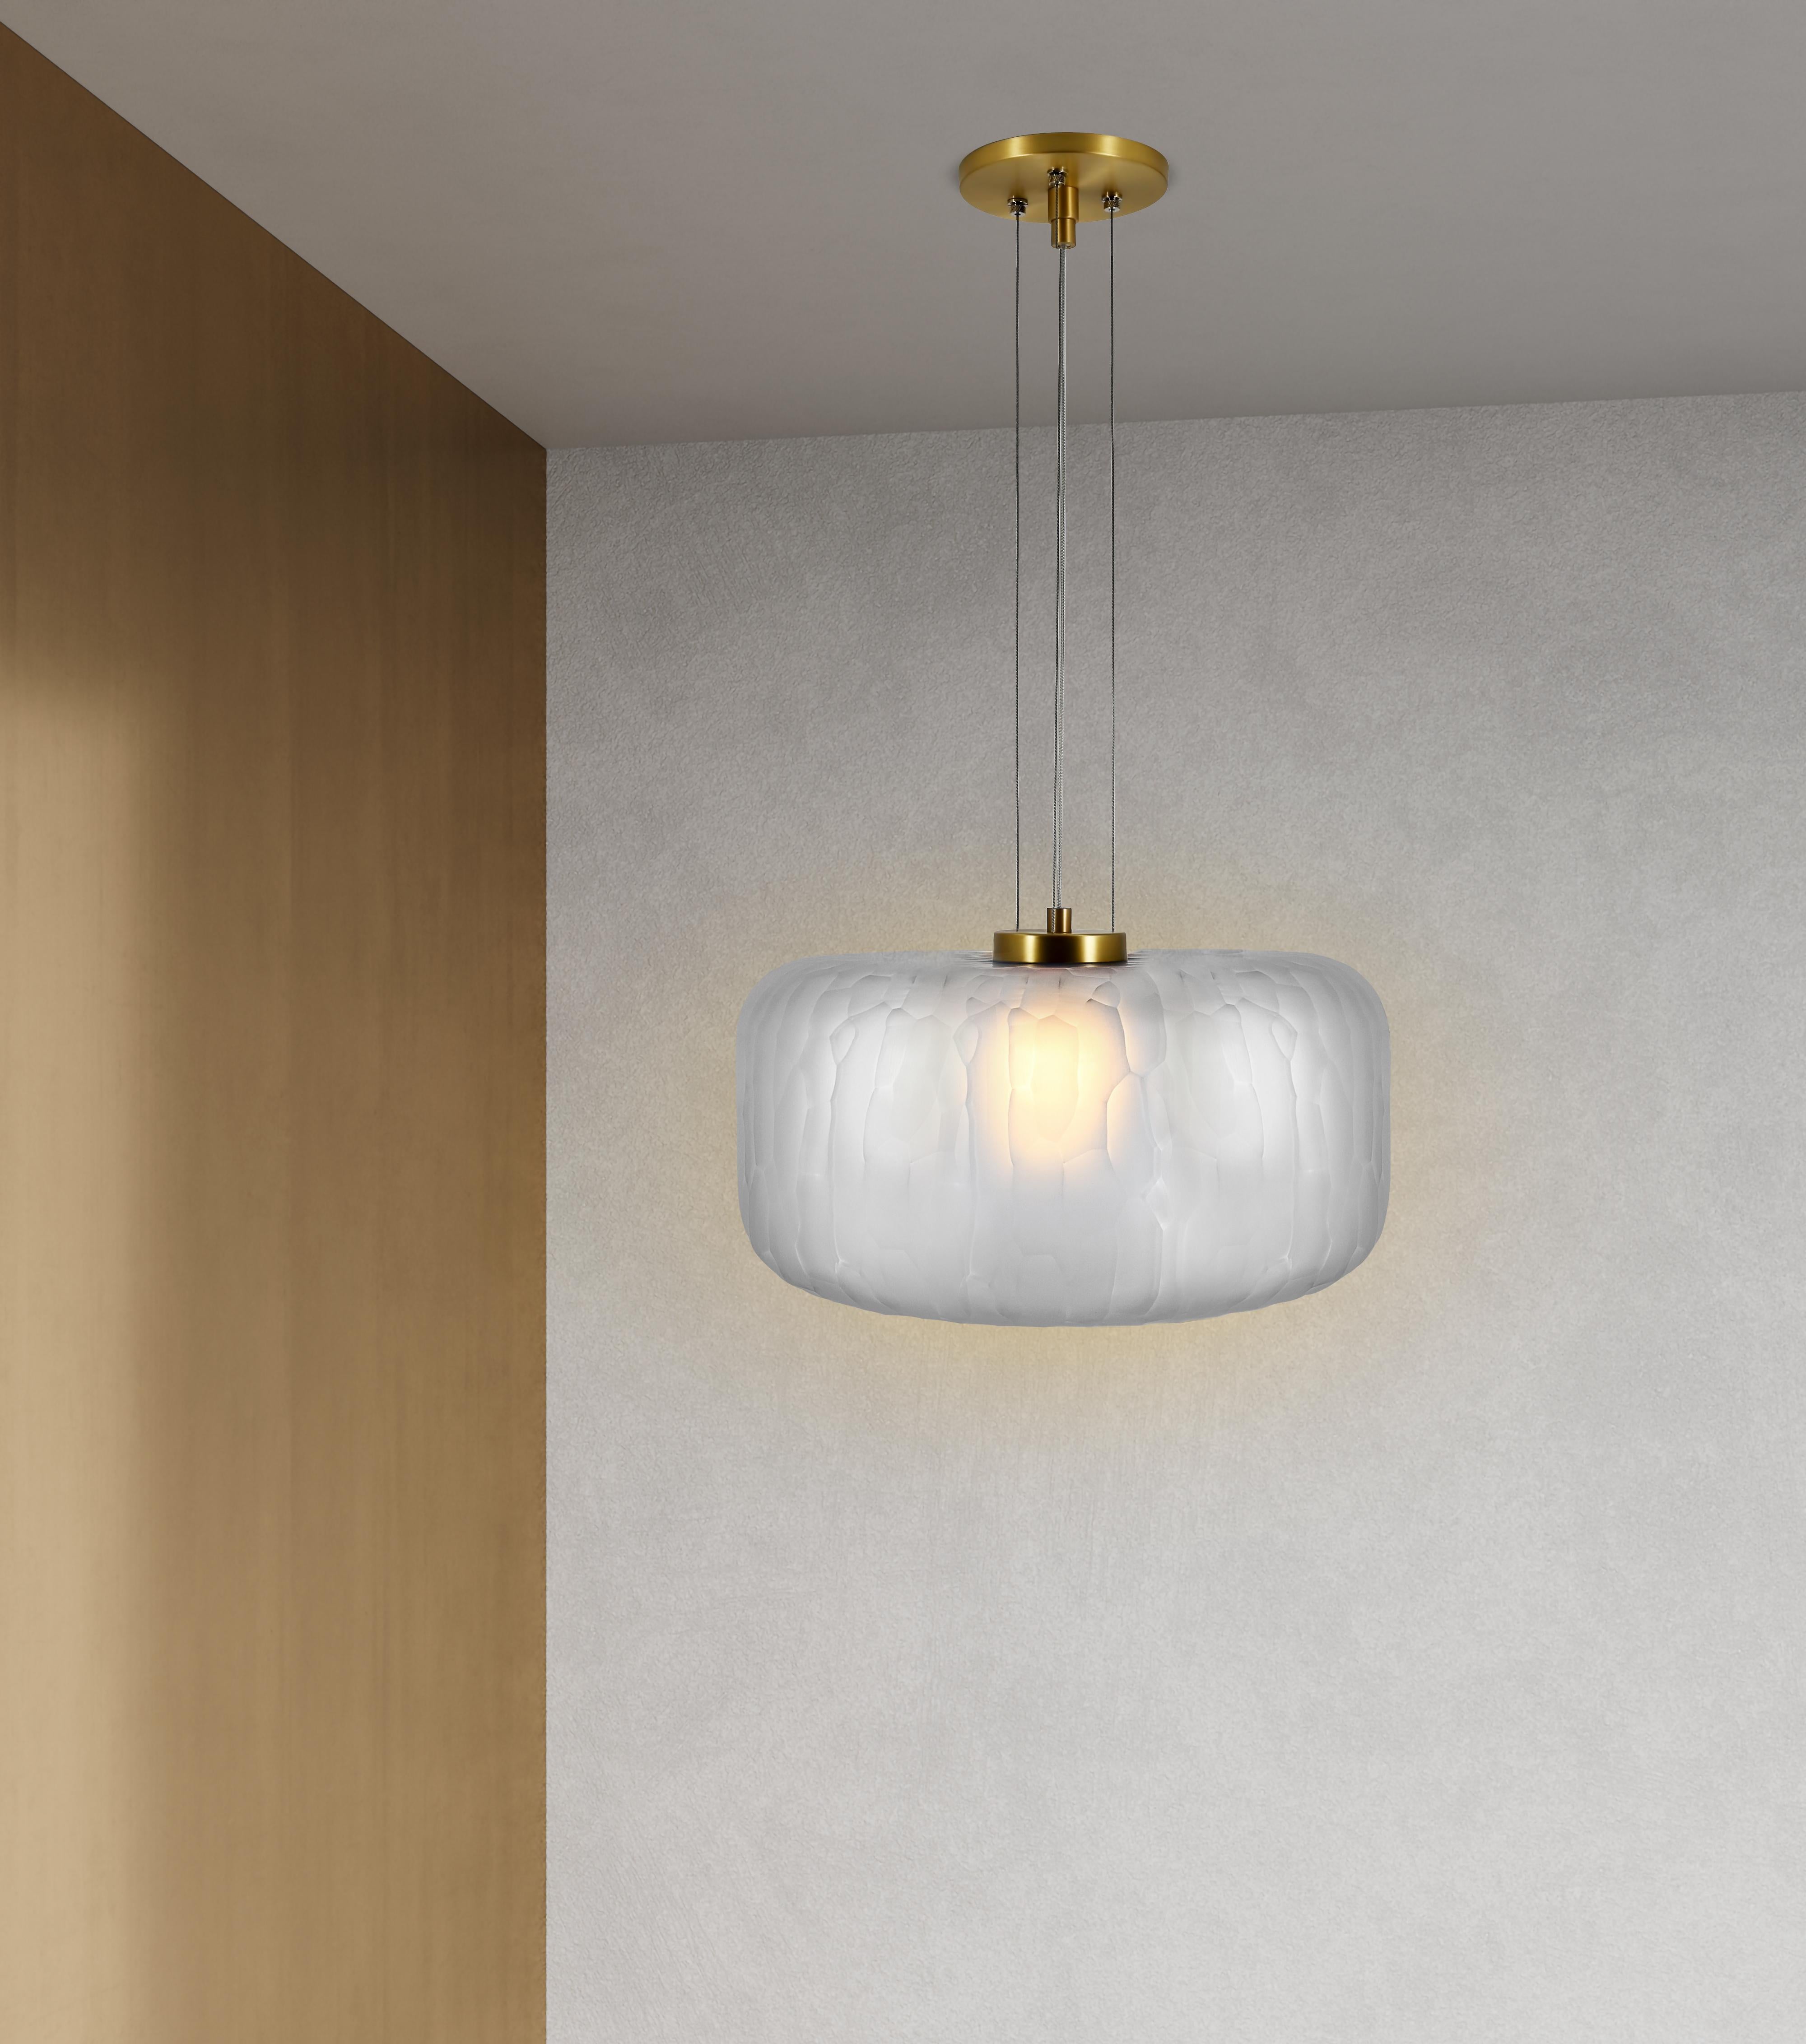 The Shereen large pendant was designed with the expressive elegance of gemstone jewelry in mind. Bold, rounded contours with frosted, multifaceted surfaces create a remarkably exquisite sculptural piece with a rich, modern touch. Each piece is